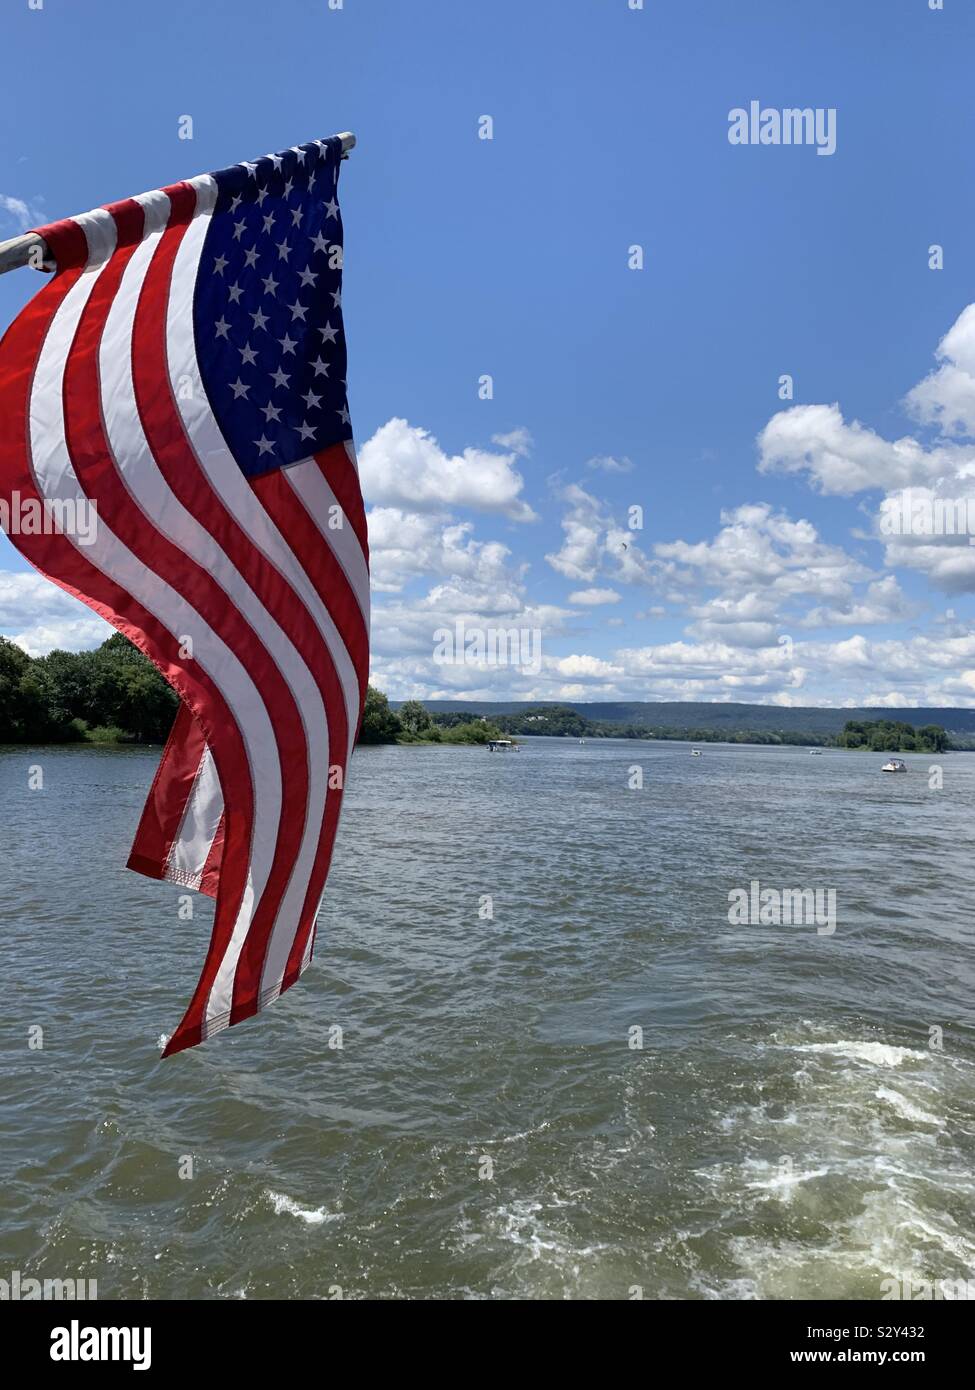 American flag blowing in the wind off the back of a boat on the river. Stock Photo